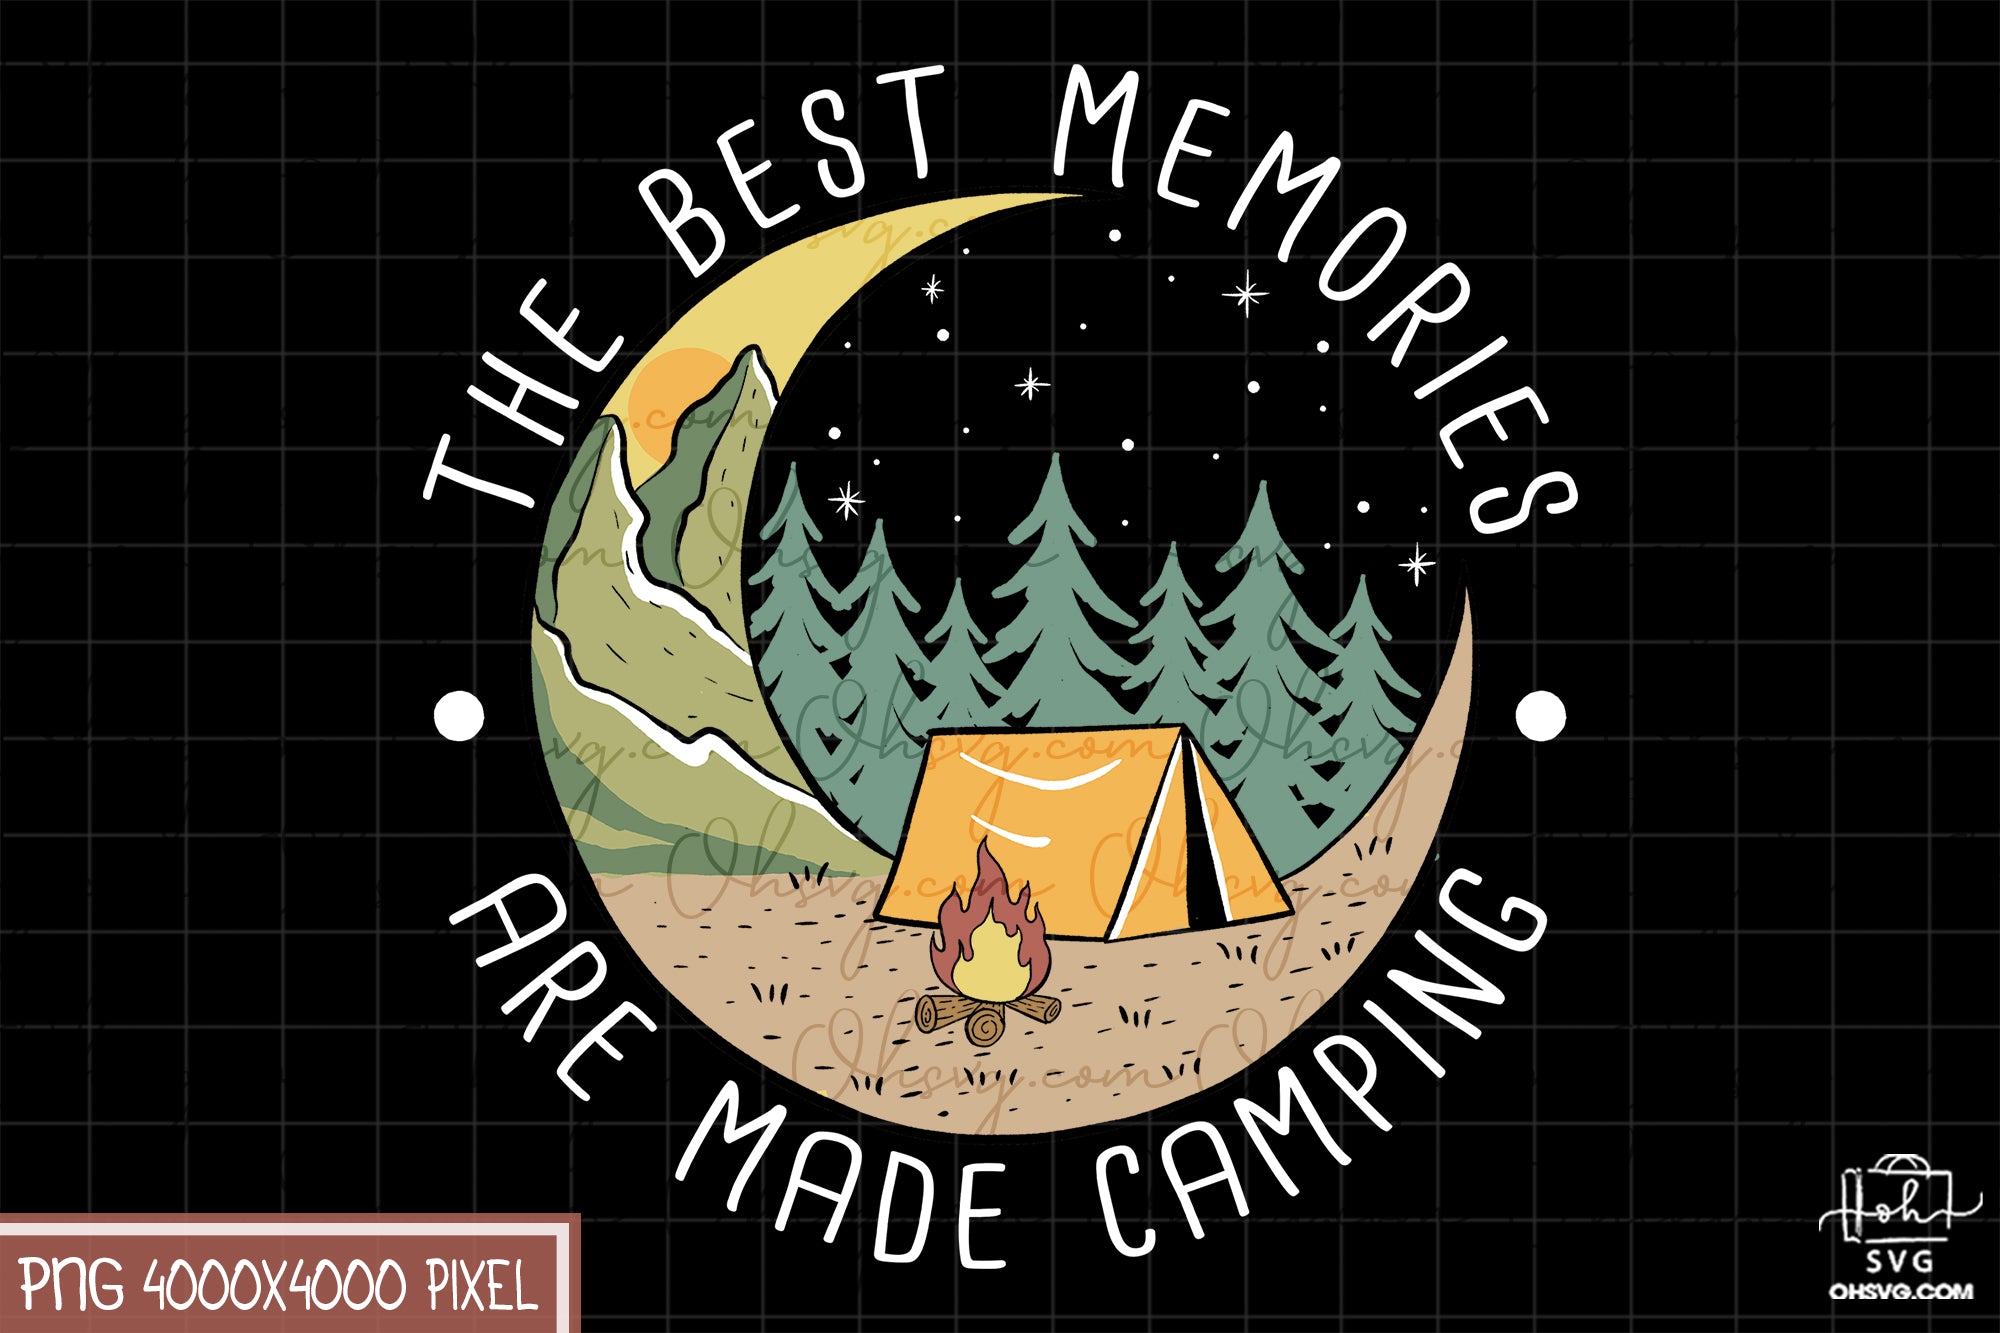 The Best Memories Camping Sublimation PNG, Camping Life PNG, Camping Outdoor PNG